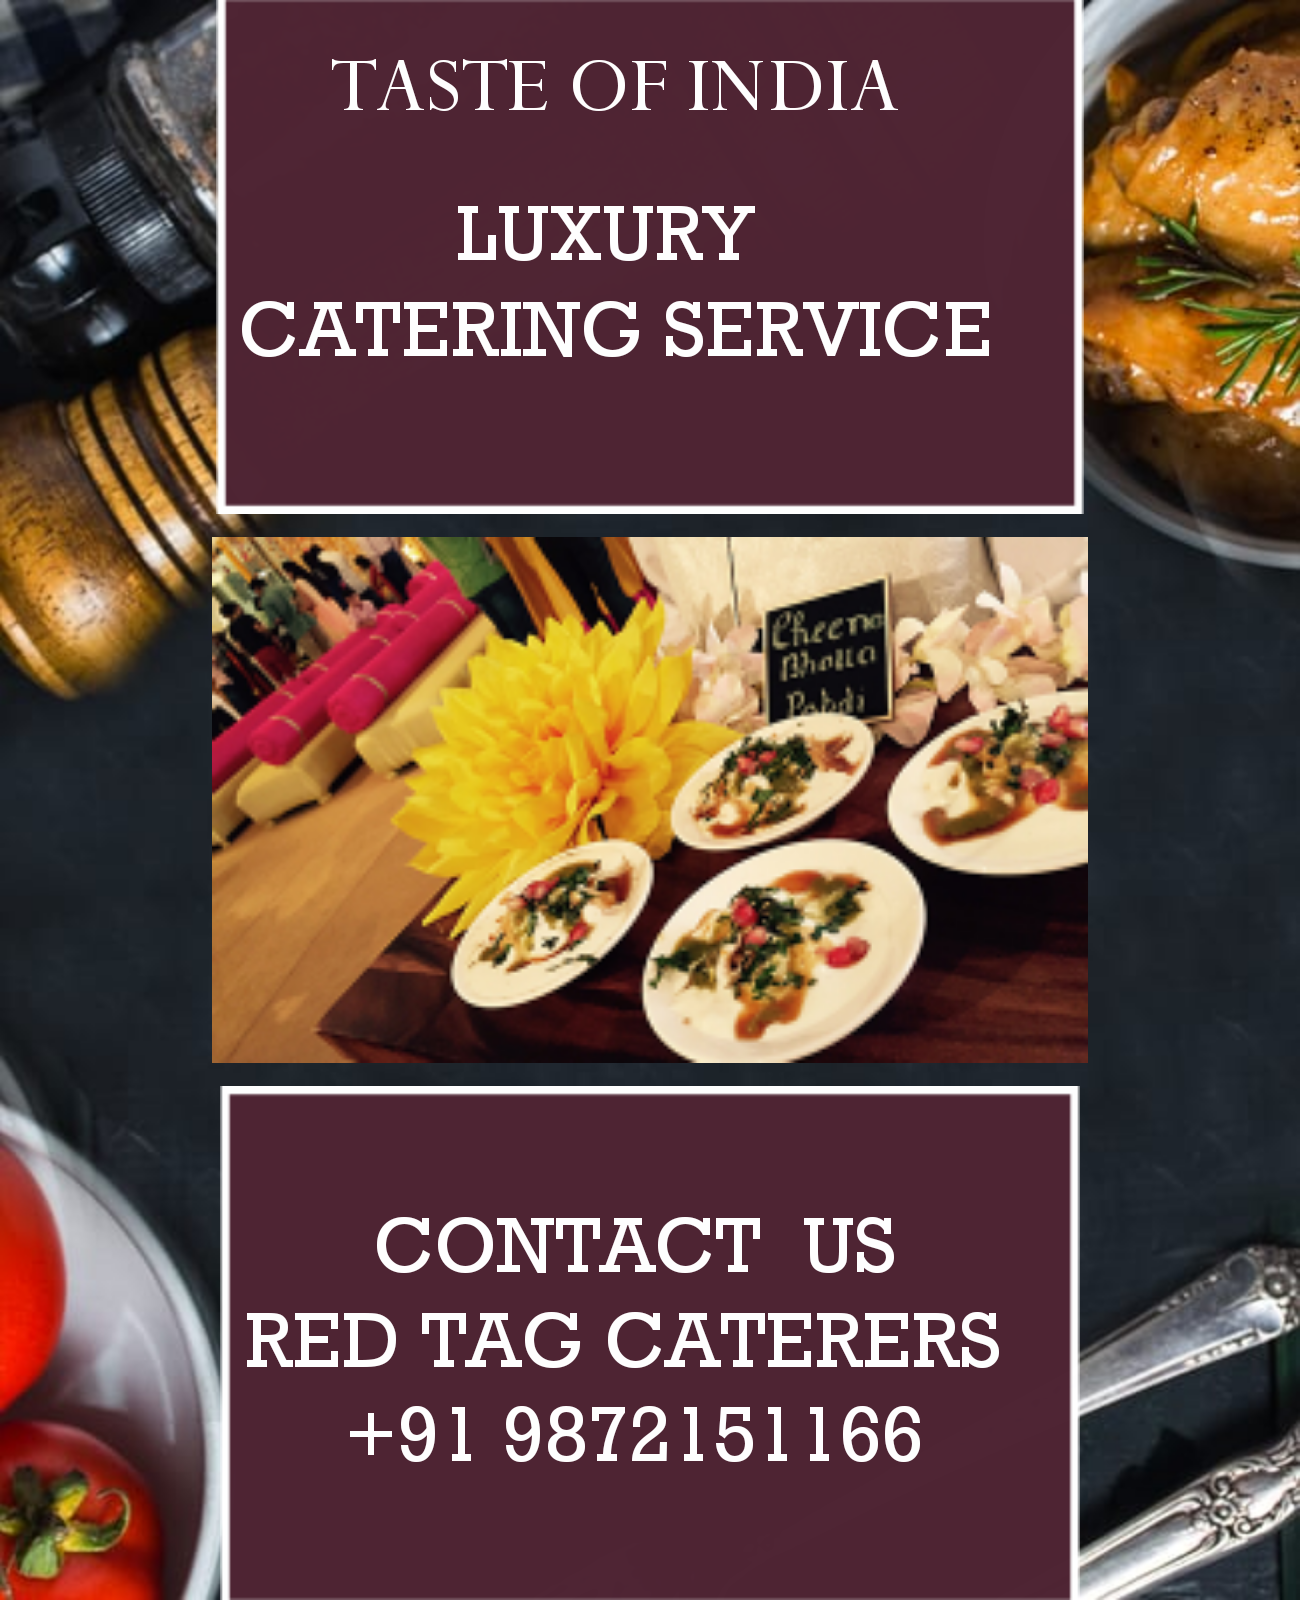 Experienced caterers in Chandigarh  | Red Tag Caterers | experienced caterers in Chandigarh, best caterers in Chandigarh, best luxury catering company in Chandigarh, best non-vegetarian catering in Chandigarh, catering service in Chandigarh,  - GL44706